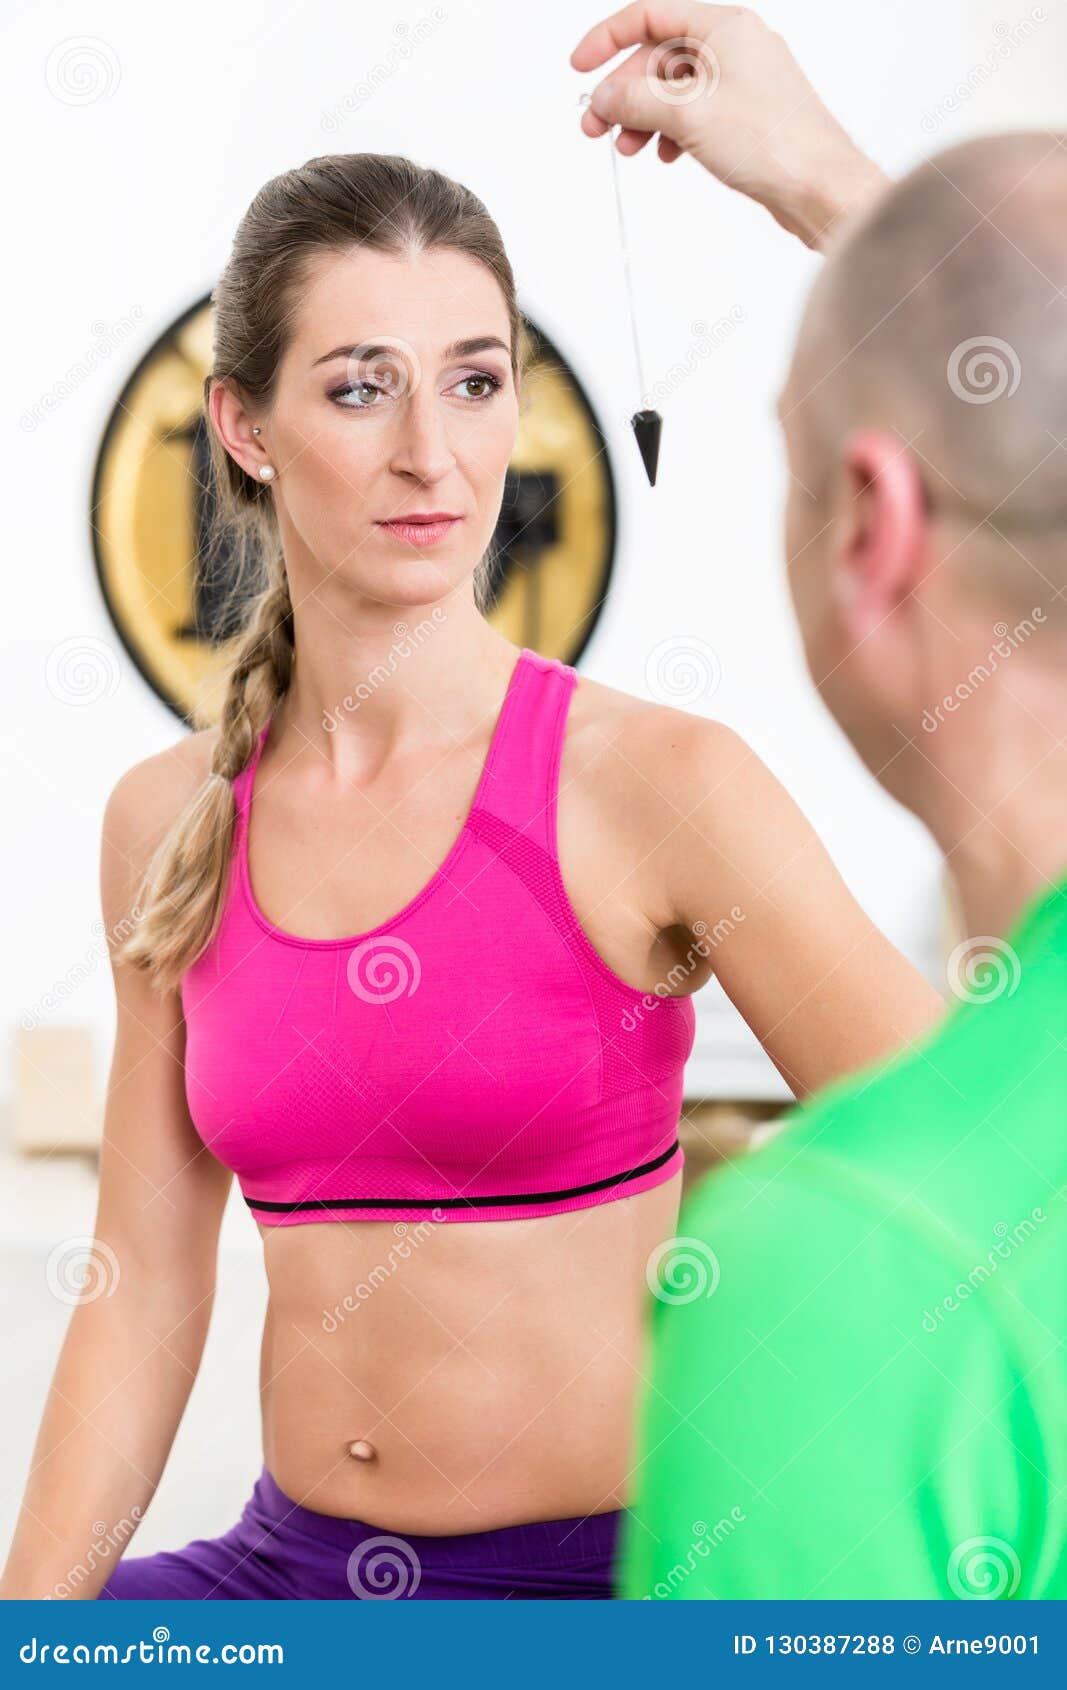 https://thumbs.dreamstime.com/z/close-up-male-instructor-hypnotize-fit-women-pendulum-tool-instructor-hypnotizing-woman-pendulum-tool-130387288.jpg